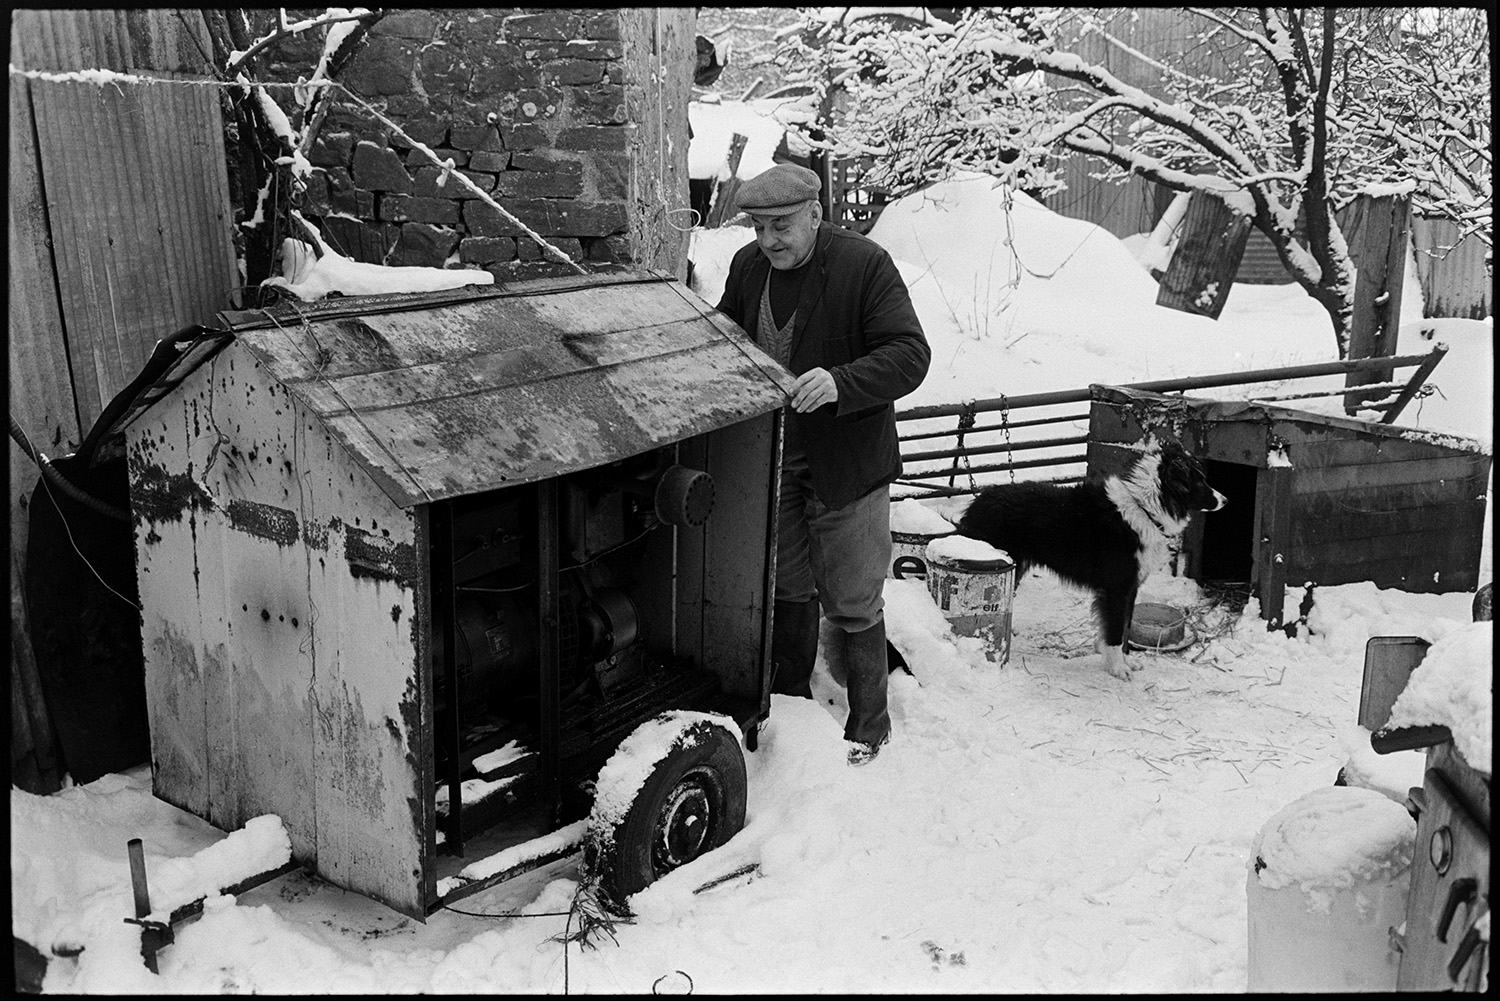 Snow, farmyard poultry, goats and dogs. Tractor and collapsing corrugated iron sheds.
[Cyril Bennett in the snow covered farmyard at Cuppers Piece, Beaford. He is standing by a covered generator which is on wheels, alongside a dog standing by a kennel. There is a metal gate, sheds, and snow covered trees in the background.]